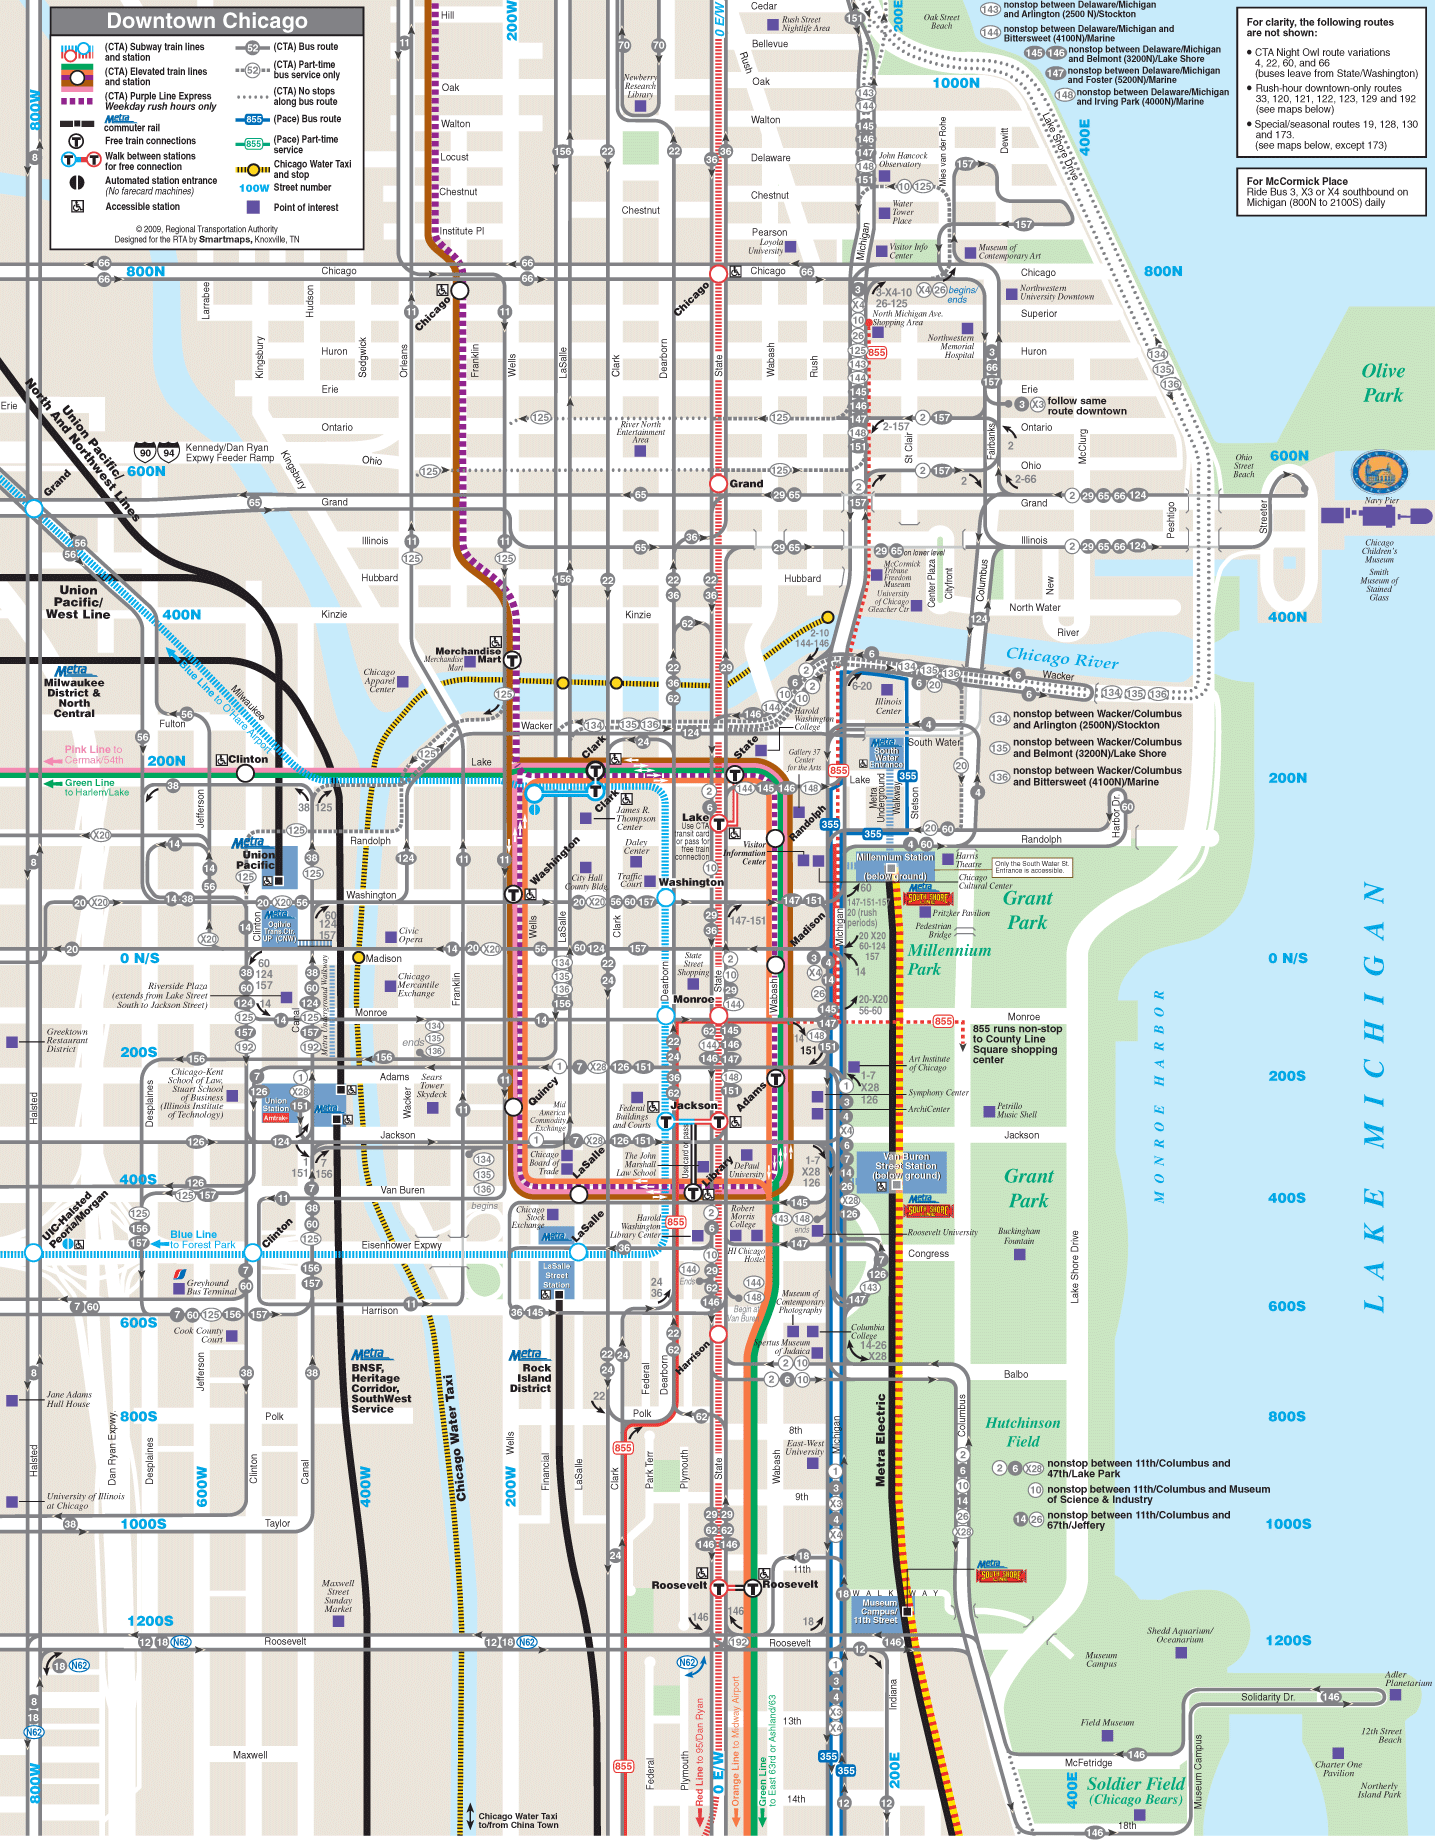 Downtown Chicago Hotel Map Find Hotels Near HD Wallpaper